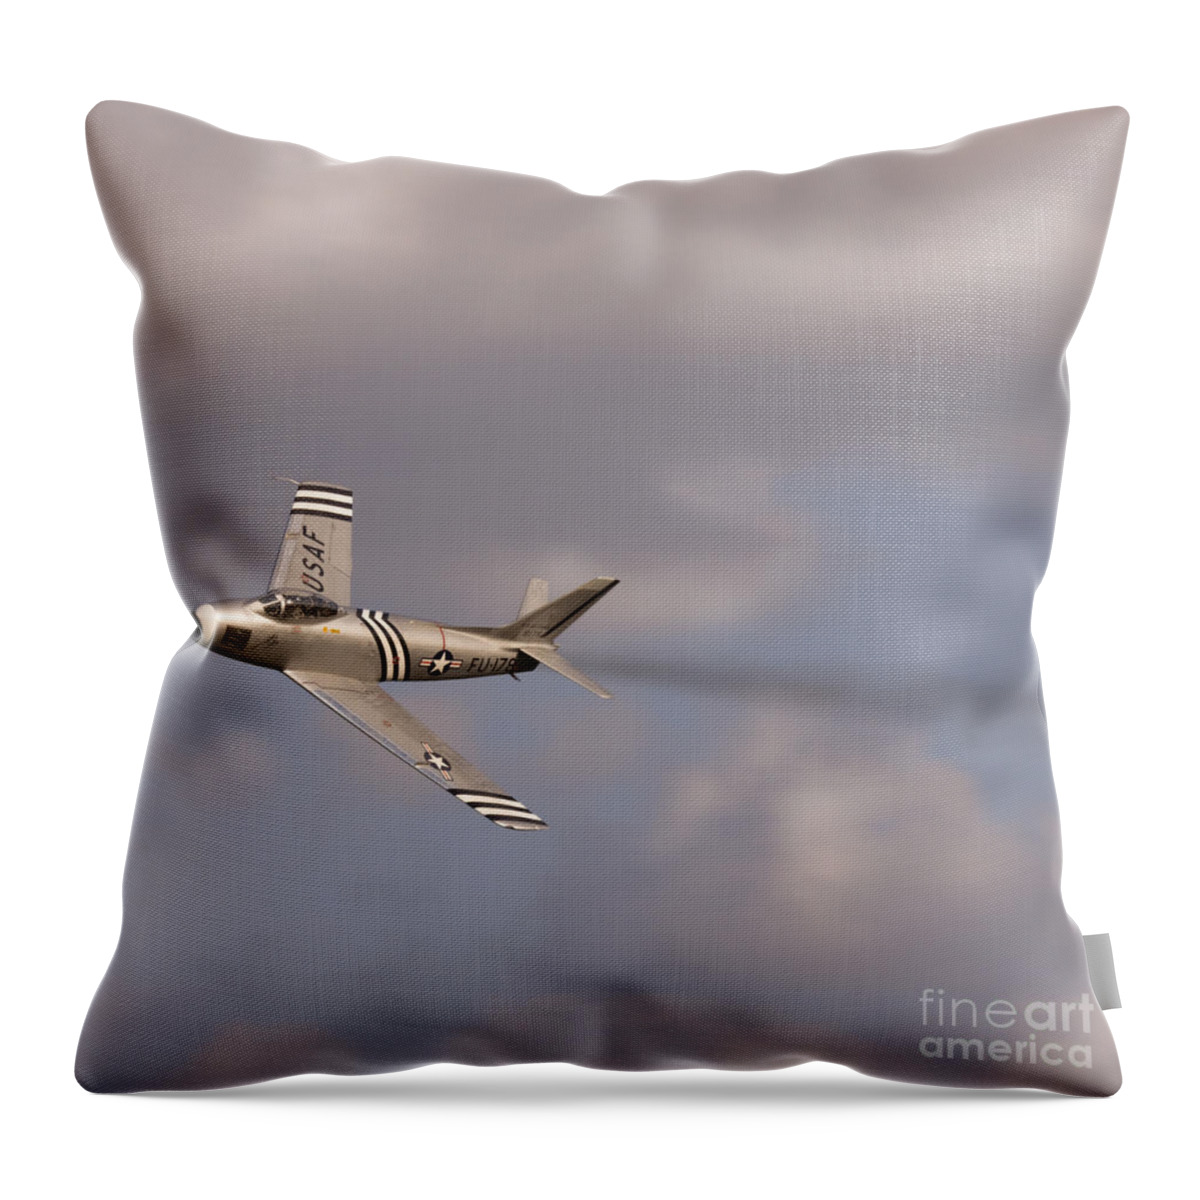 Sabre Throw Pillow featuring the photograph Sabre by Ang El